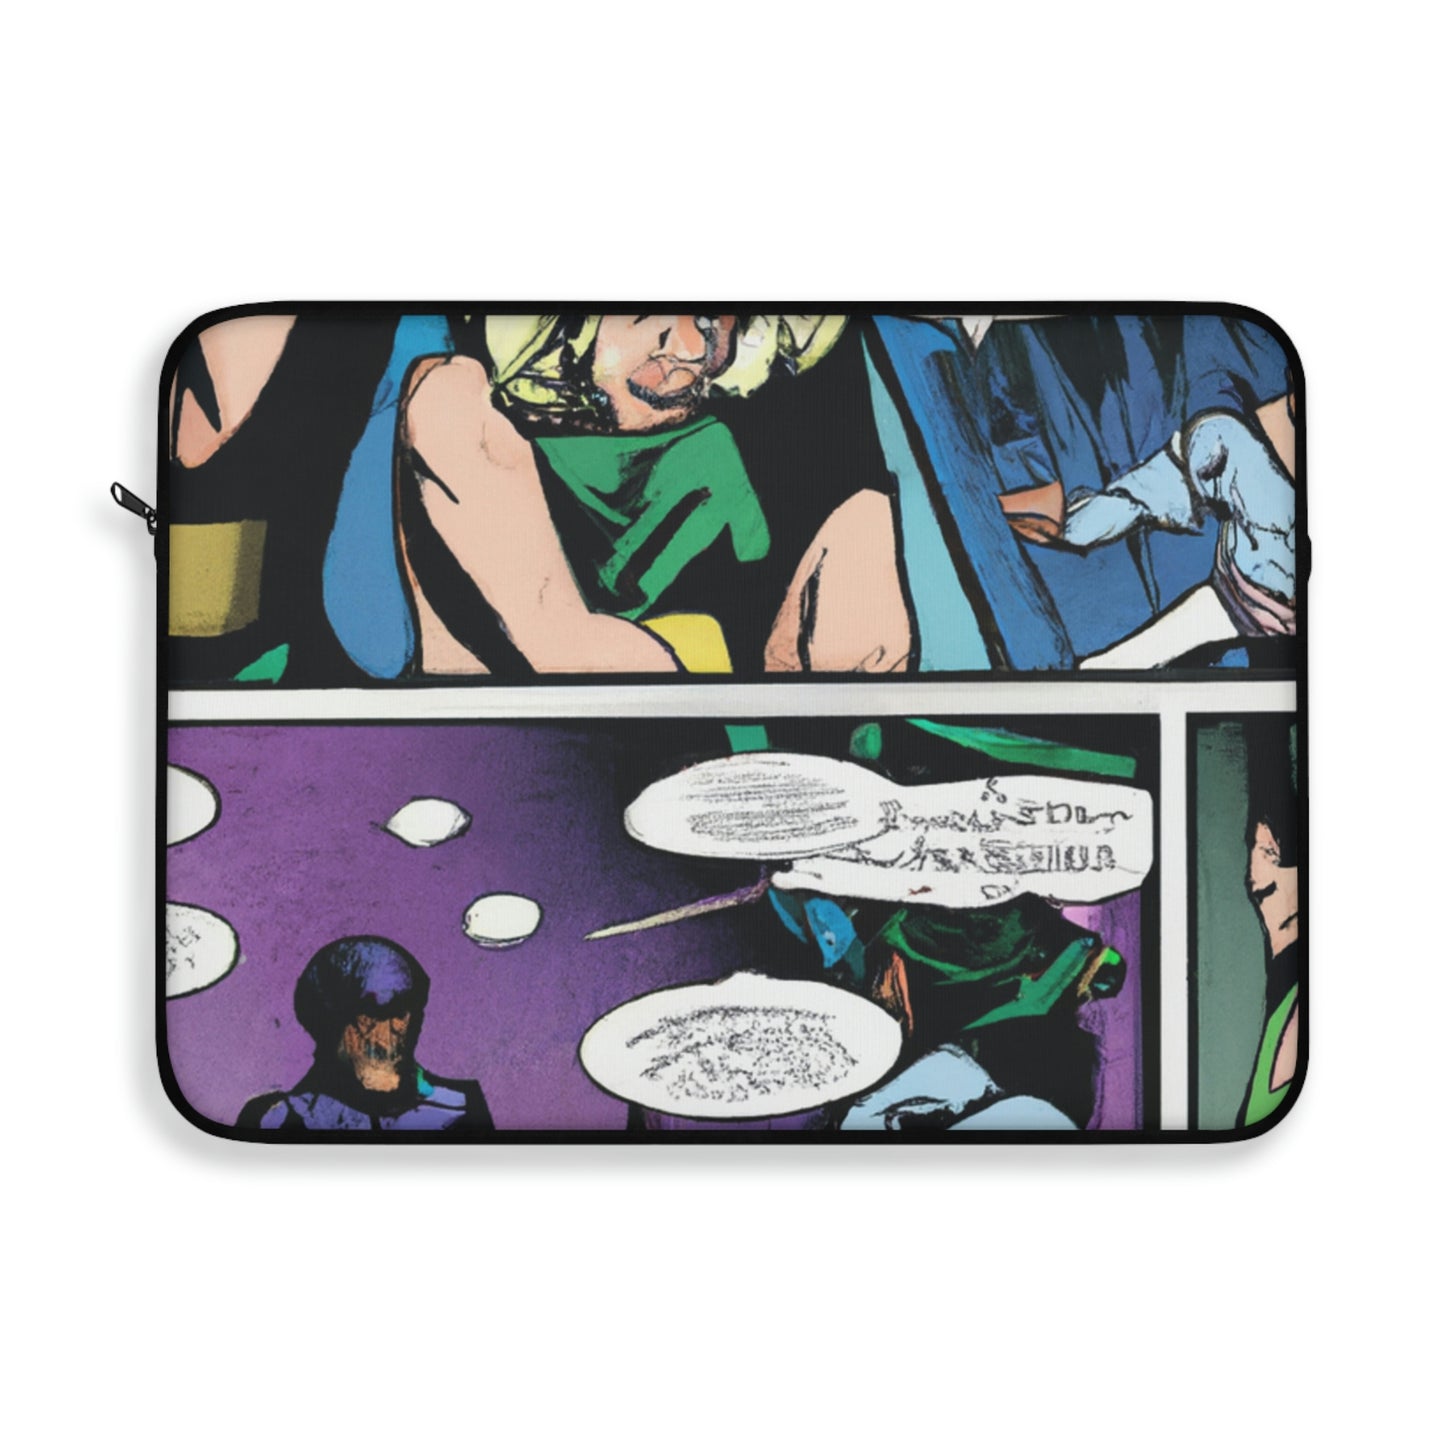 Babs Bopster - Comic Book Collector Laptop Computer Sleeve Storage Case Bag